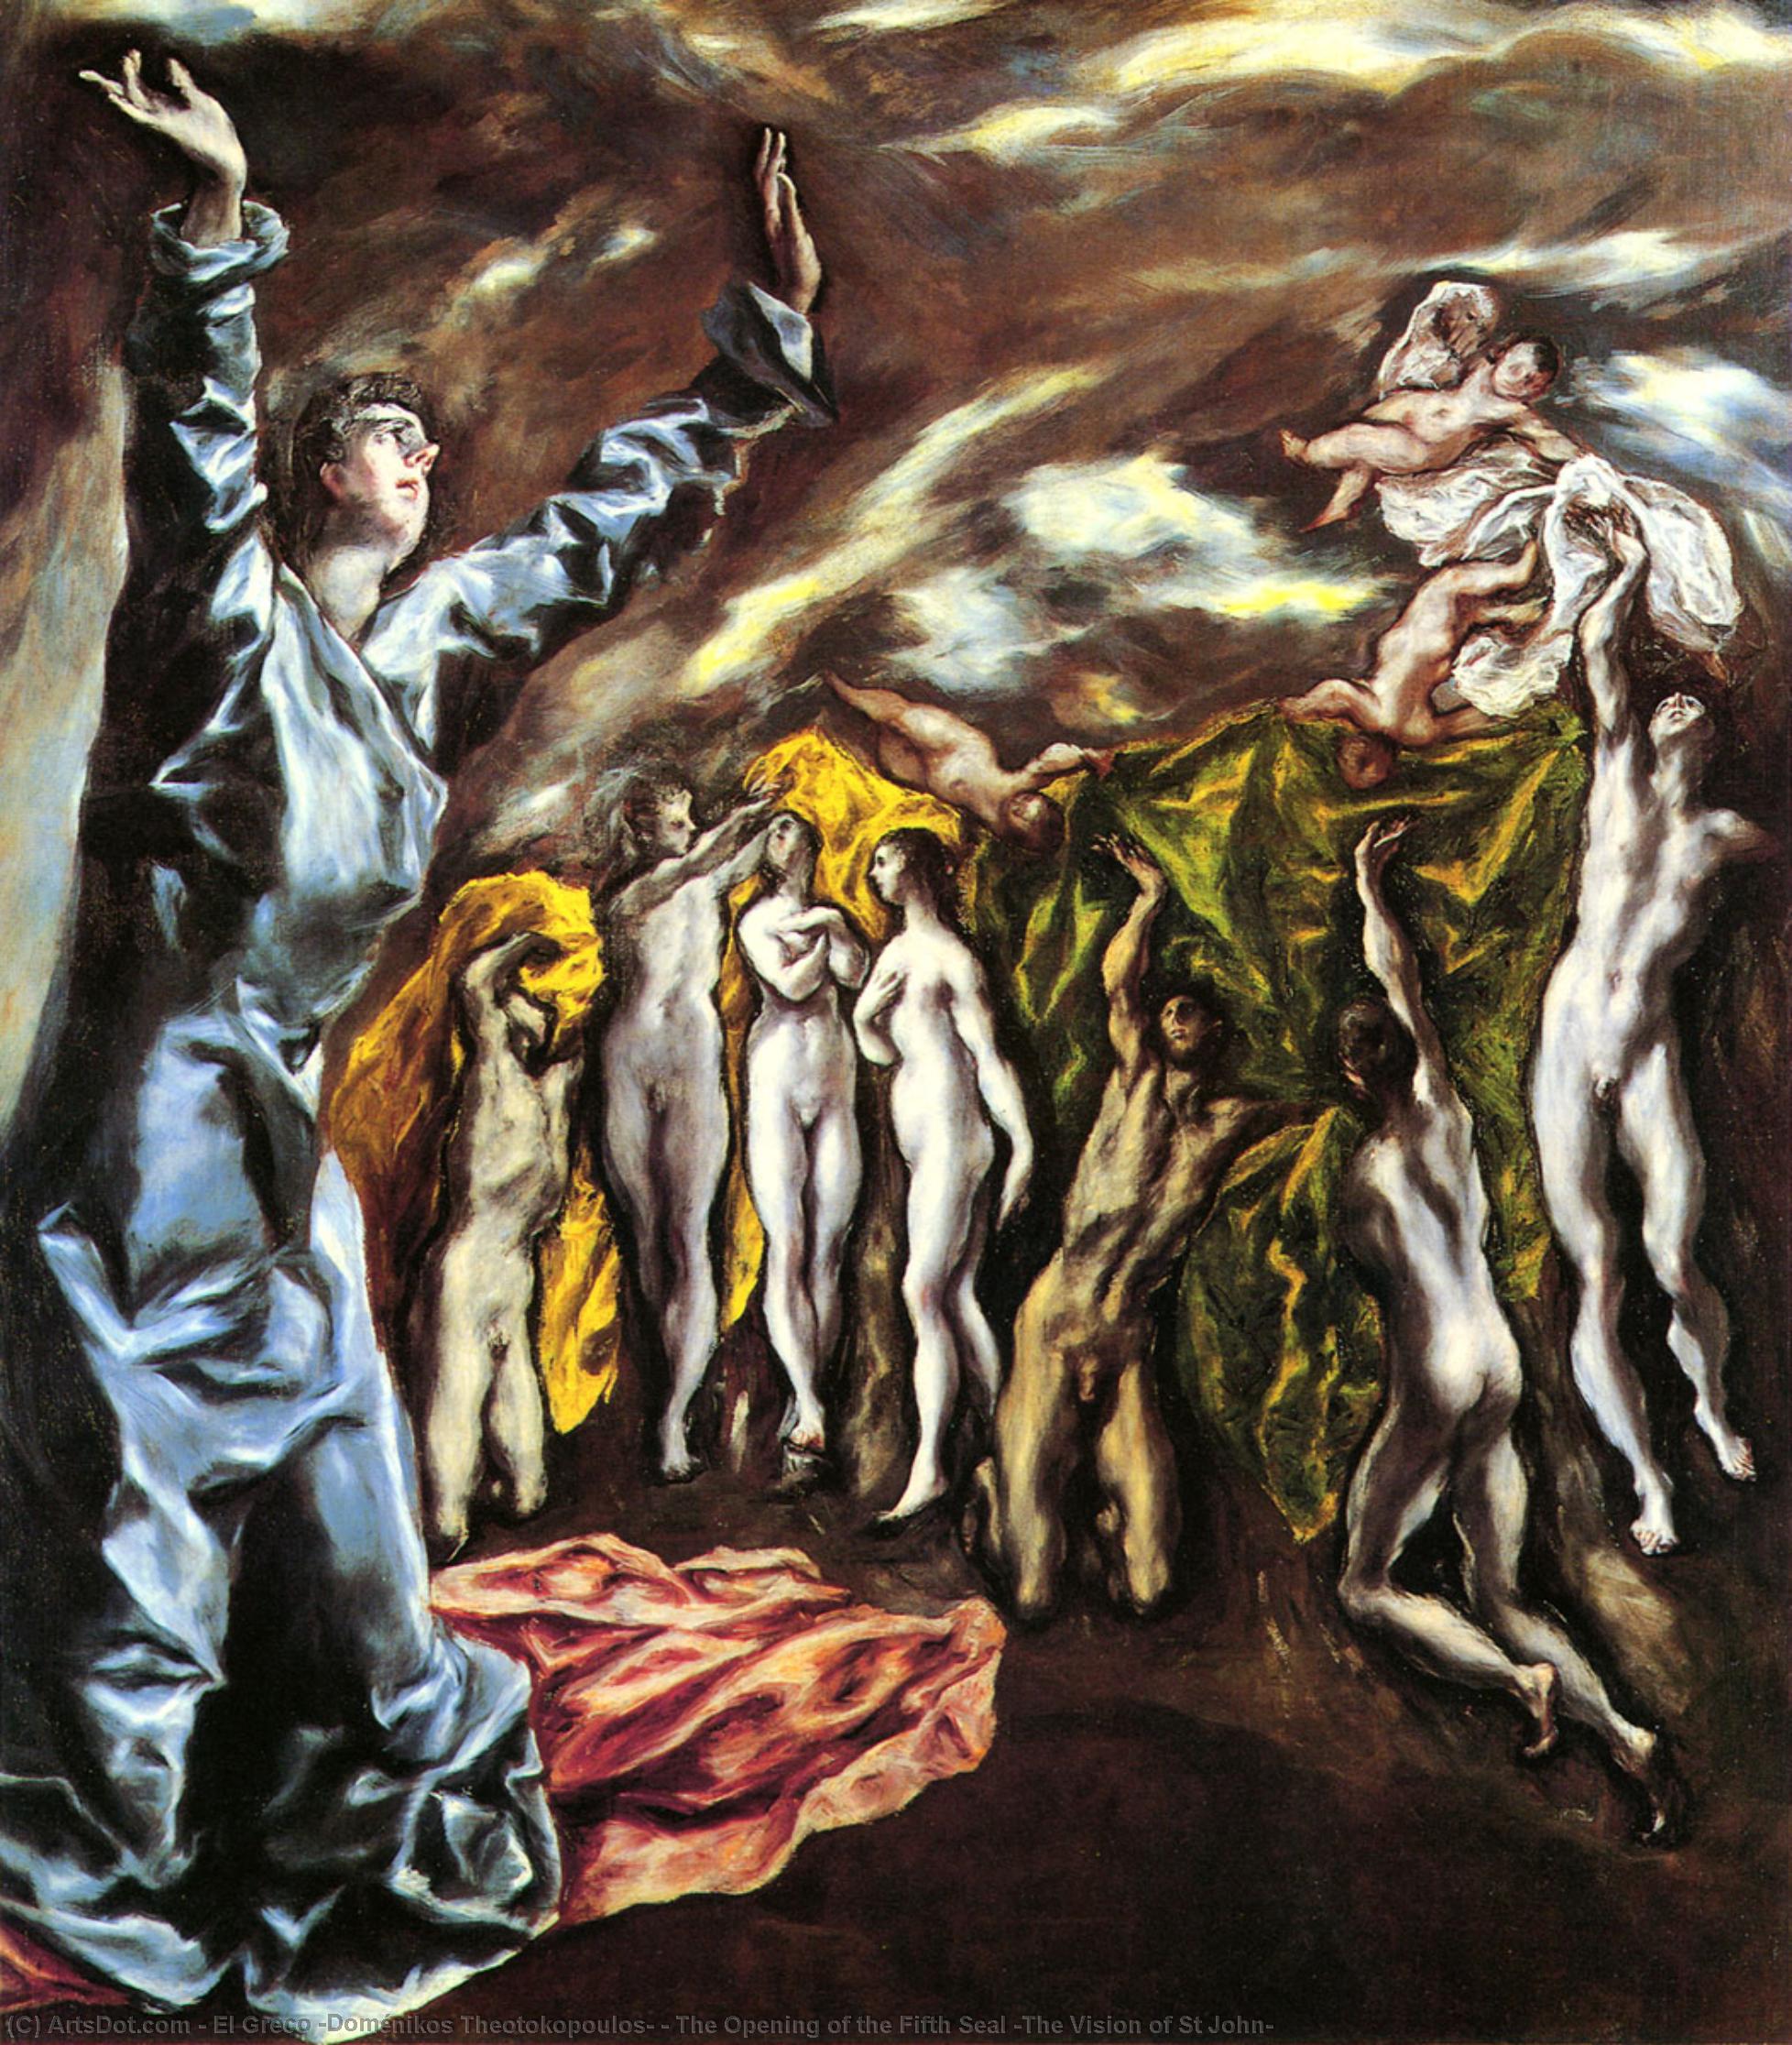 WikiOO.org - Encyclopedia of Fine Arts - Malba, Artwork El Greco (Doménikos Theotokopoulos) - The Opening of the Fifth Seal (The Vision of St John)